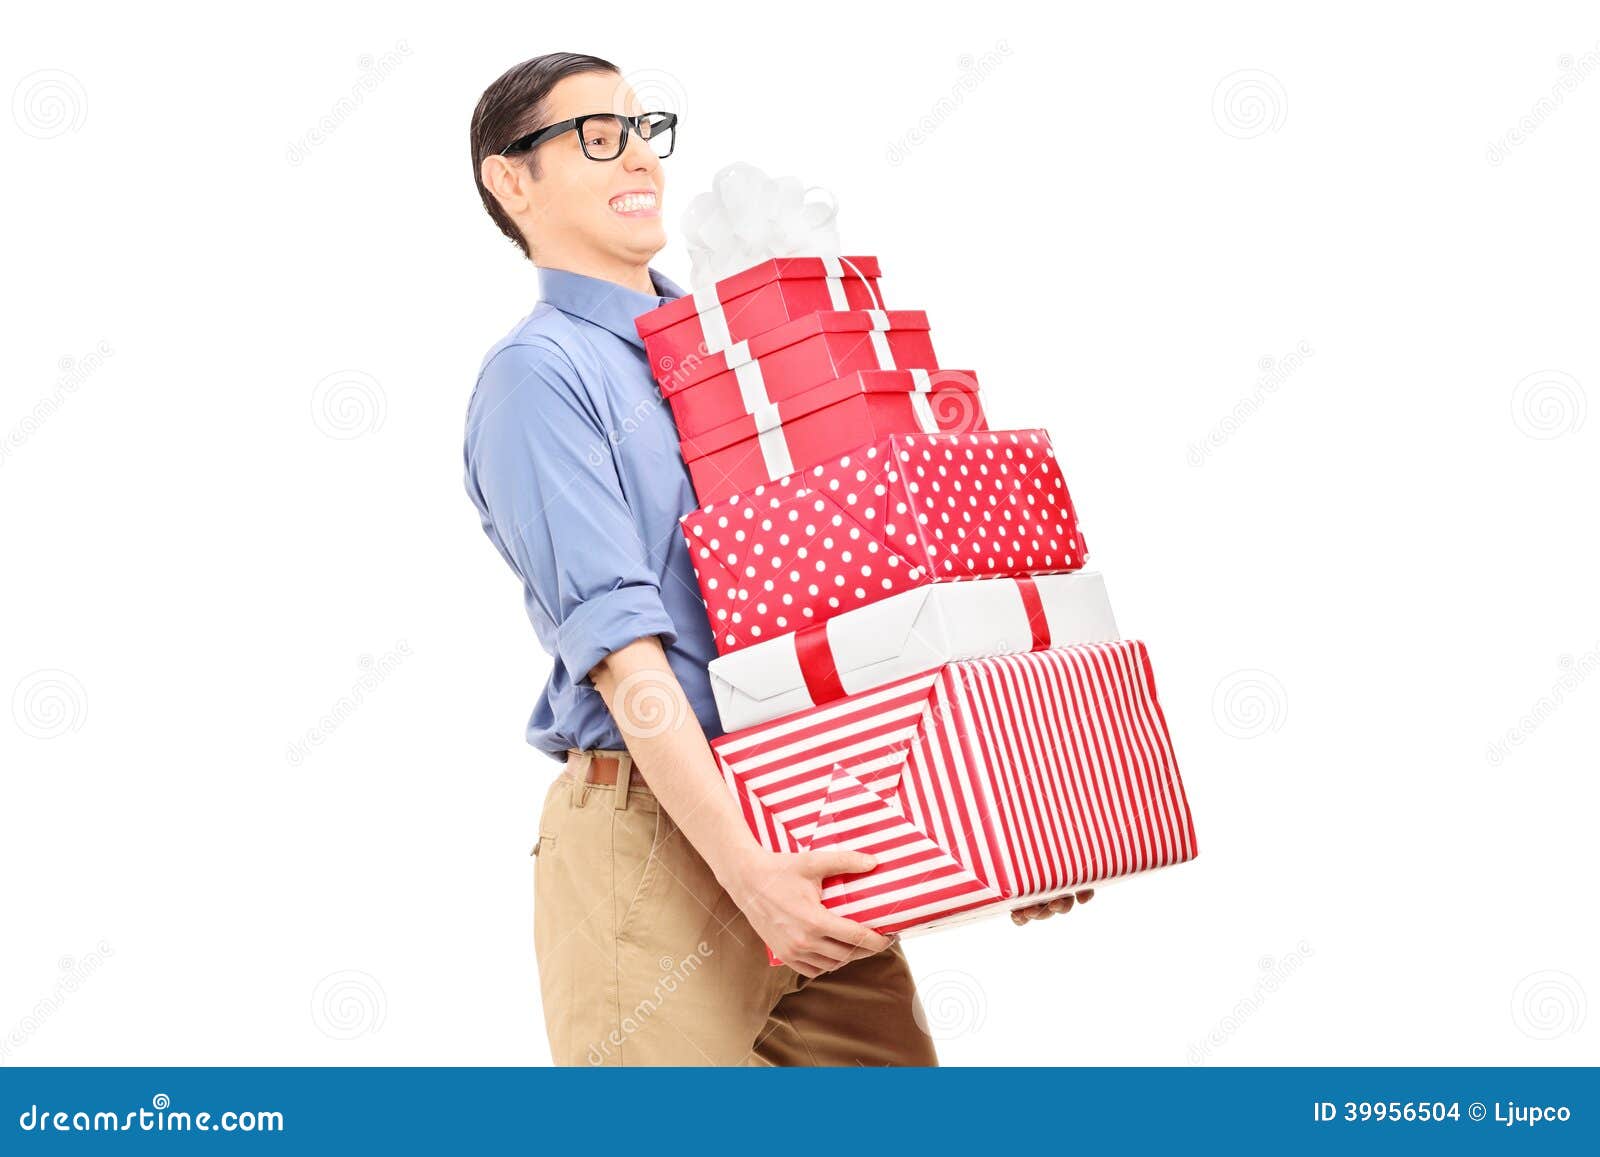 clipart man carrying heavy load - photo #34